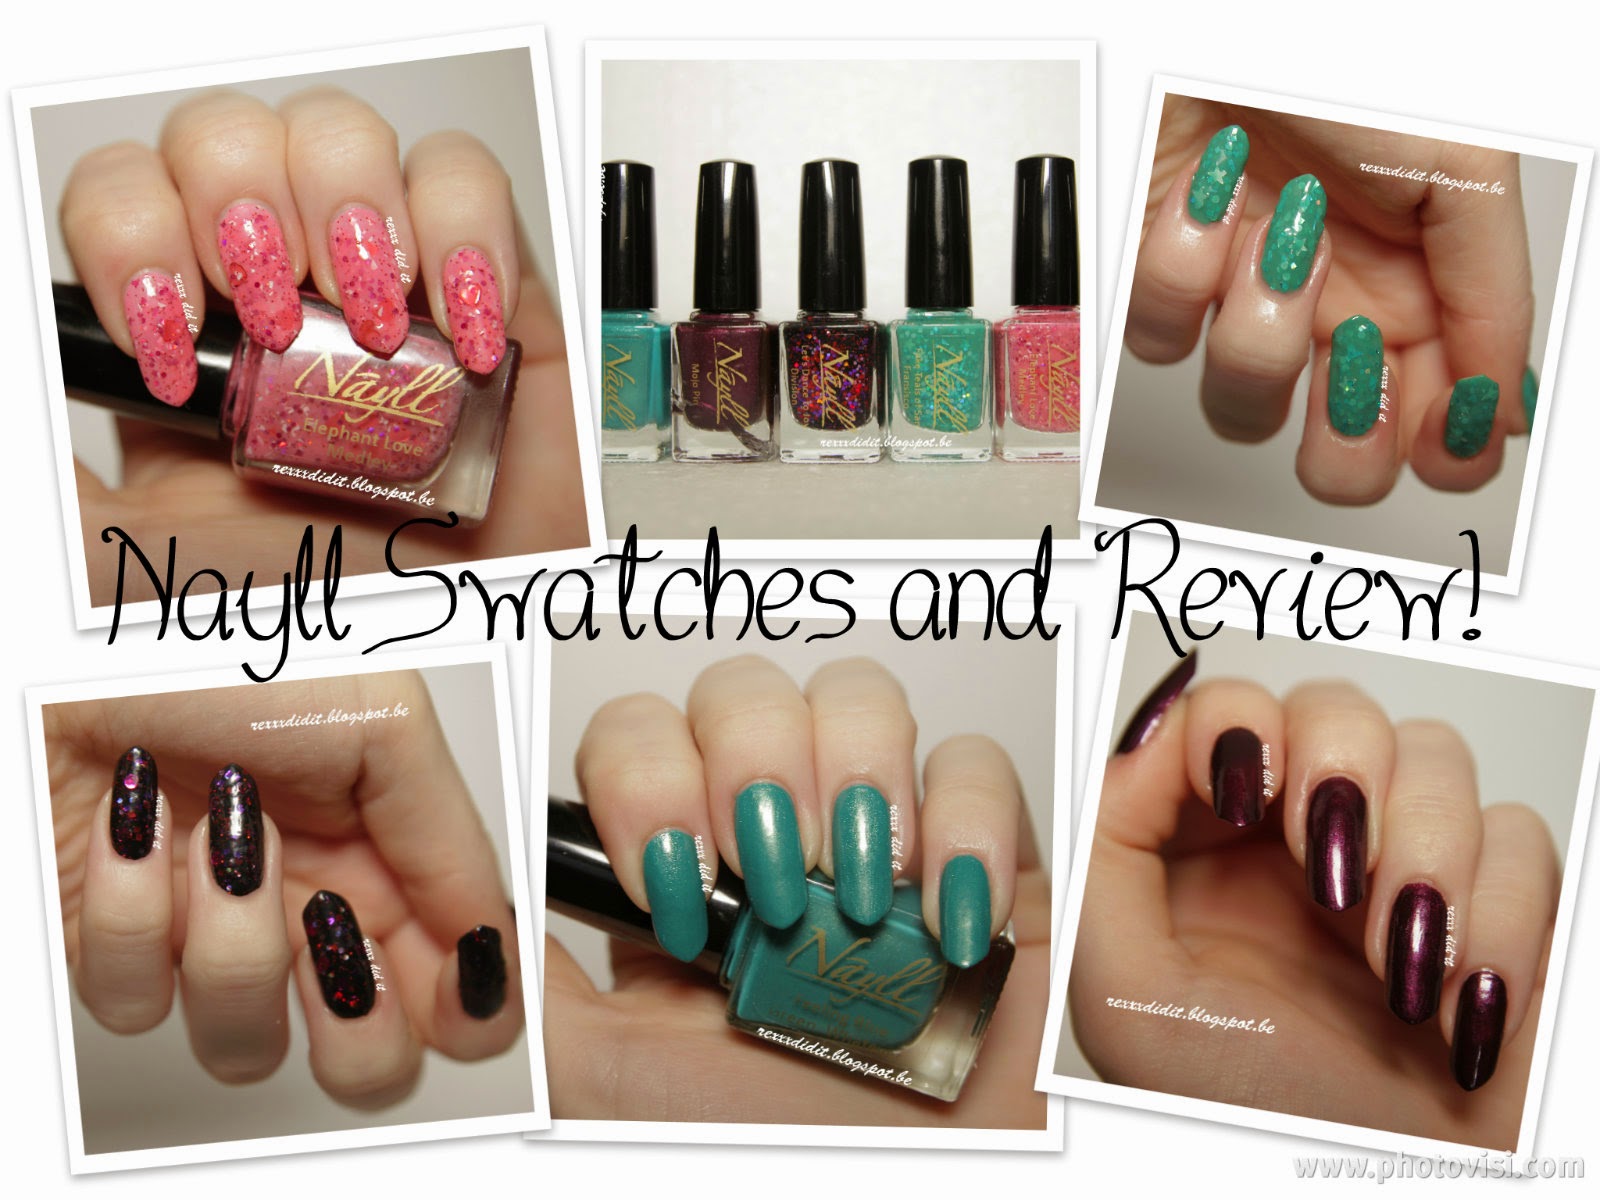 rexxx did it (old blog): Make Your Own Polish! - Nayll Swatches and ...